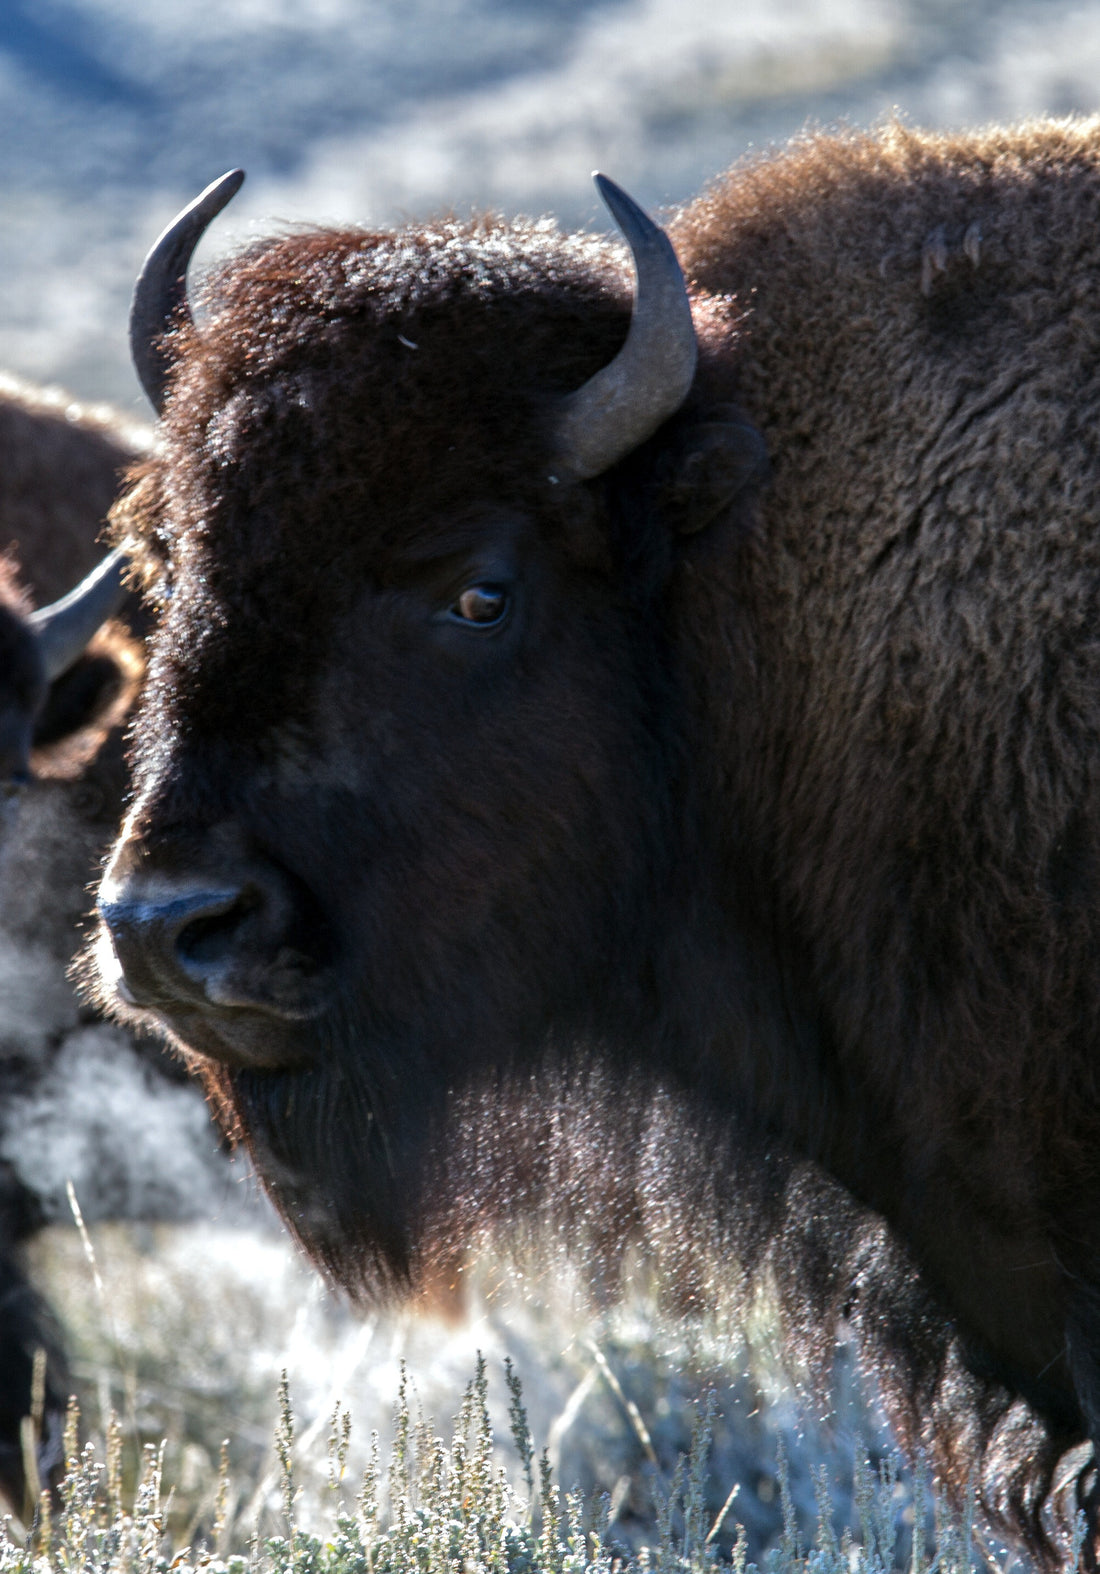 Did you know the first Saturday in November is National Bison Day?